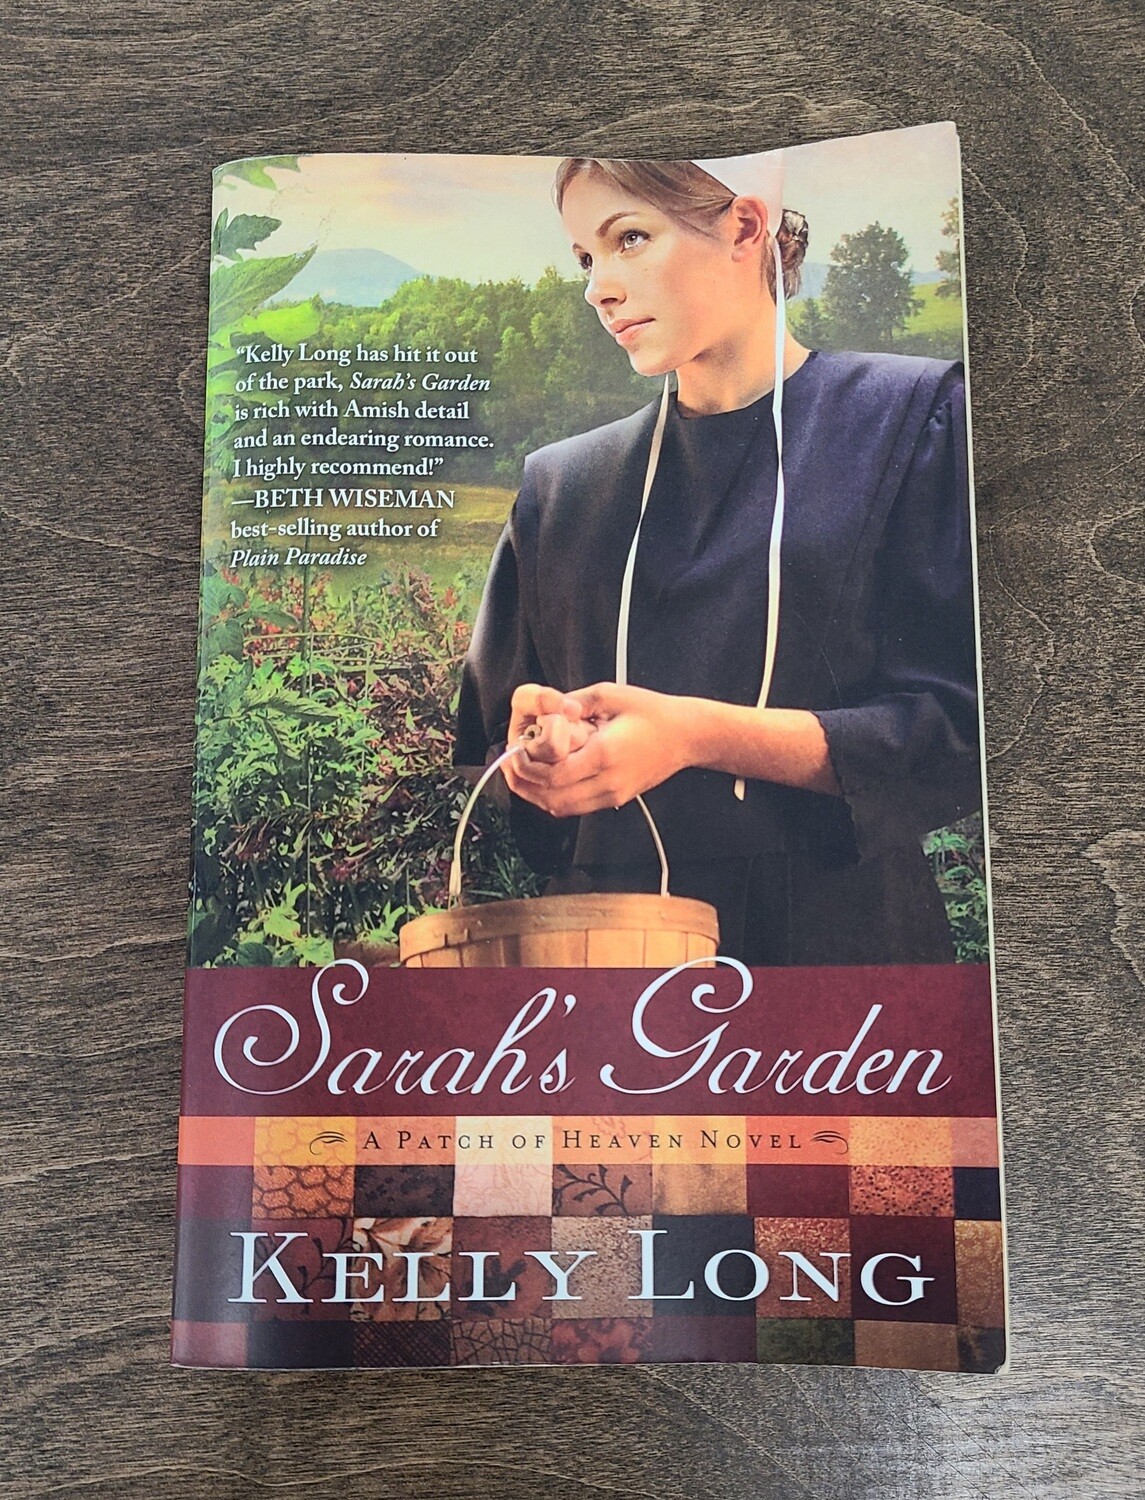 Sarah's Garden by Kelly Long